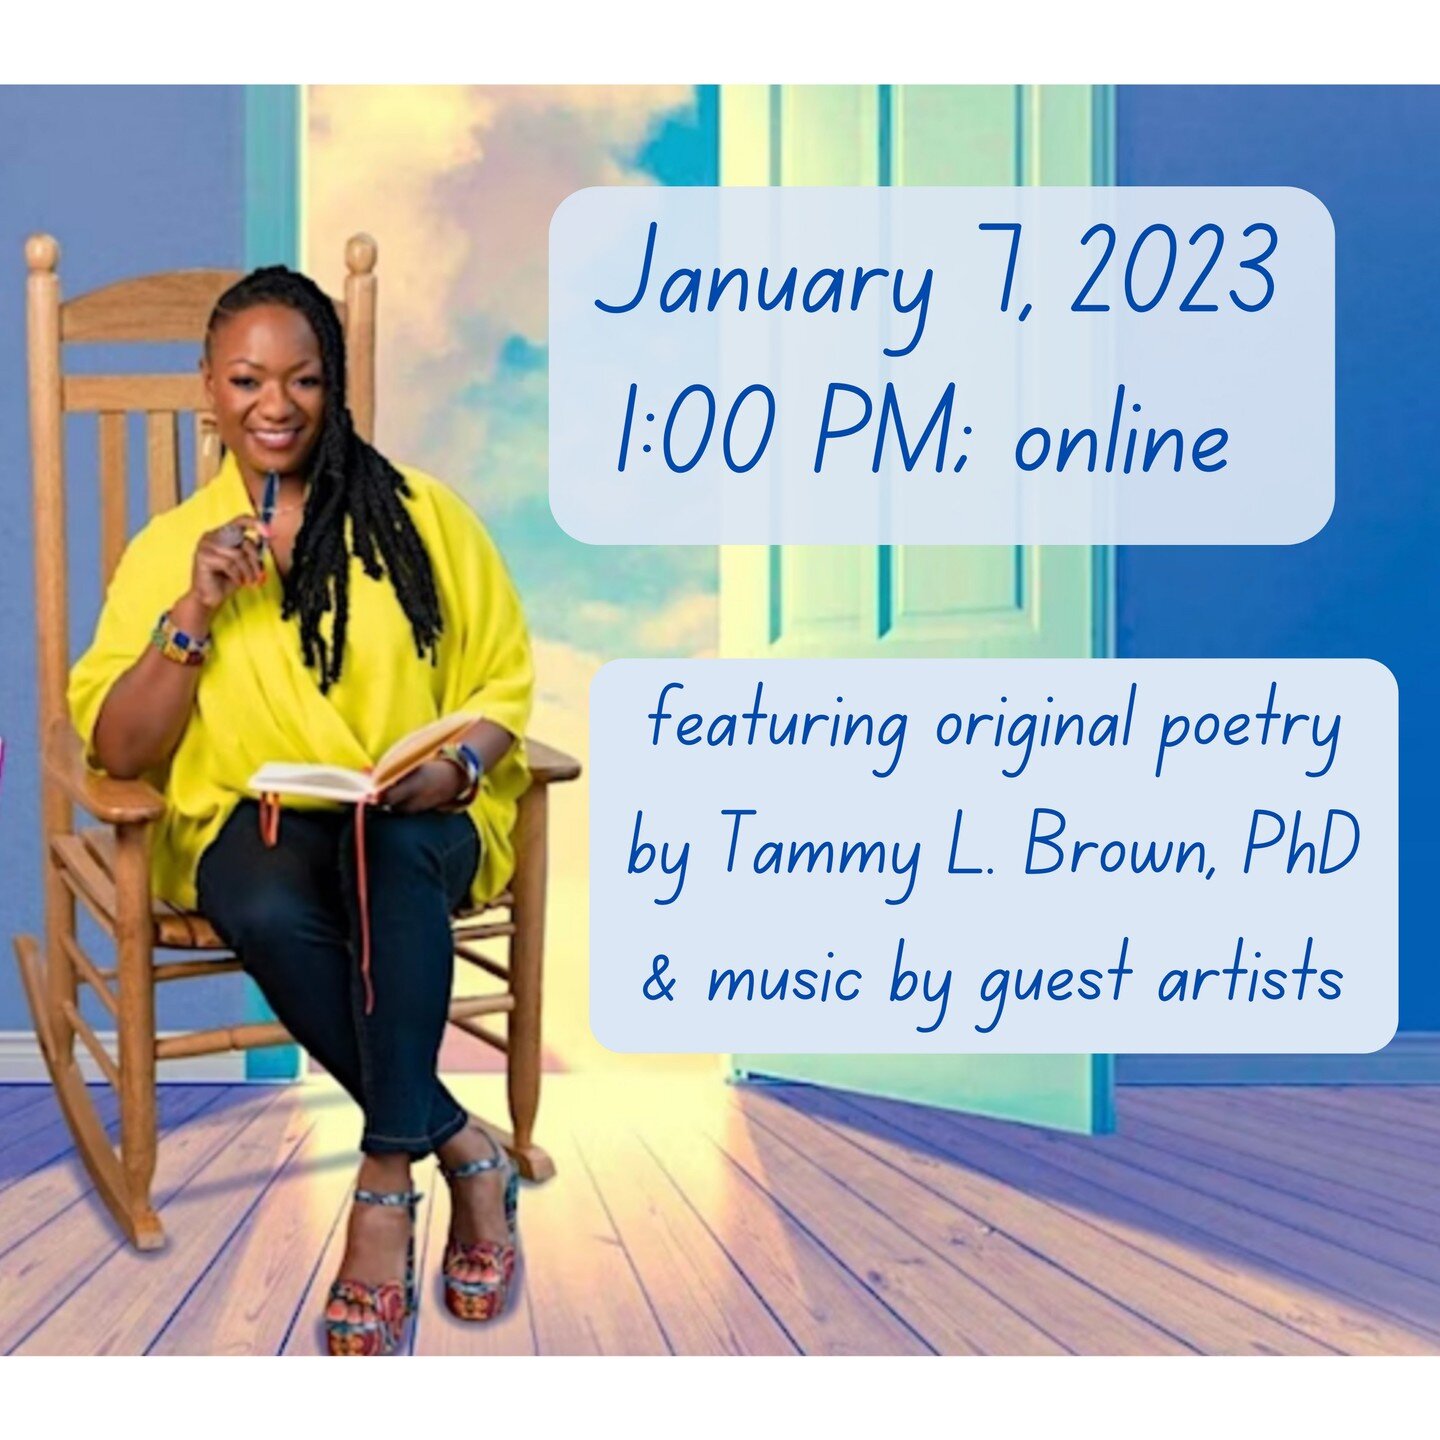 You're invited to join me ONLINE this Saturday for an event featuring new poetry by me;) &amp; music by guest artists. Hope to see you there! @blackwomenwritersarchive @adamadelphine 
#poetry #music #Black #African #diaspora #BlackGirlMagic